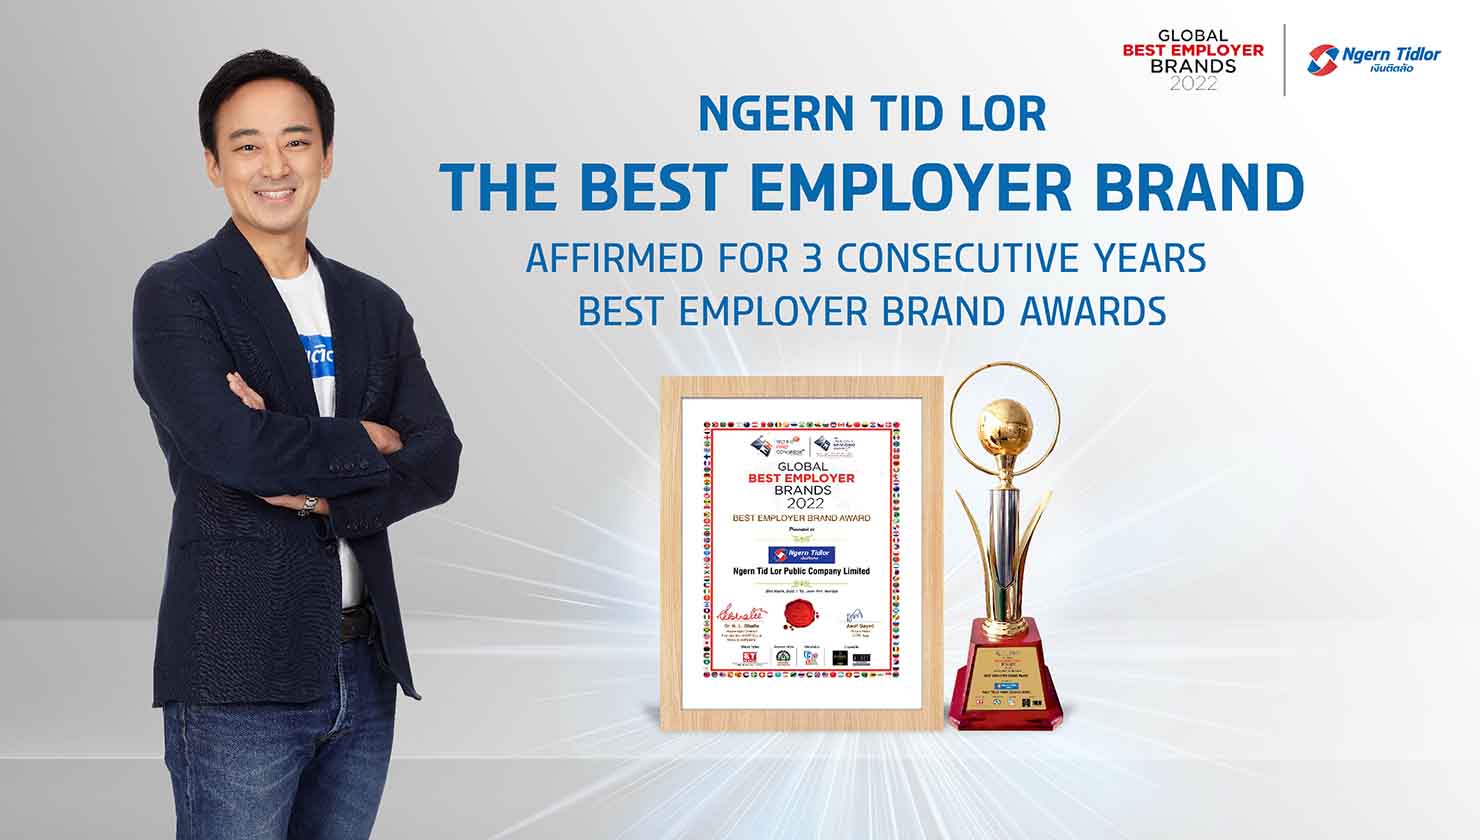 “Ngern Tid Lor” wins Best Employer Brand Award for third consecutive year